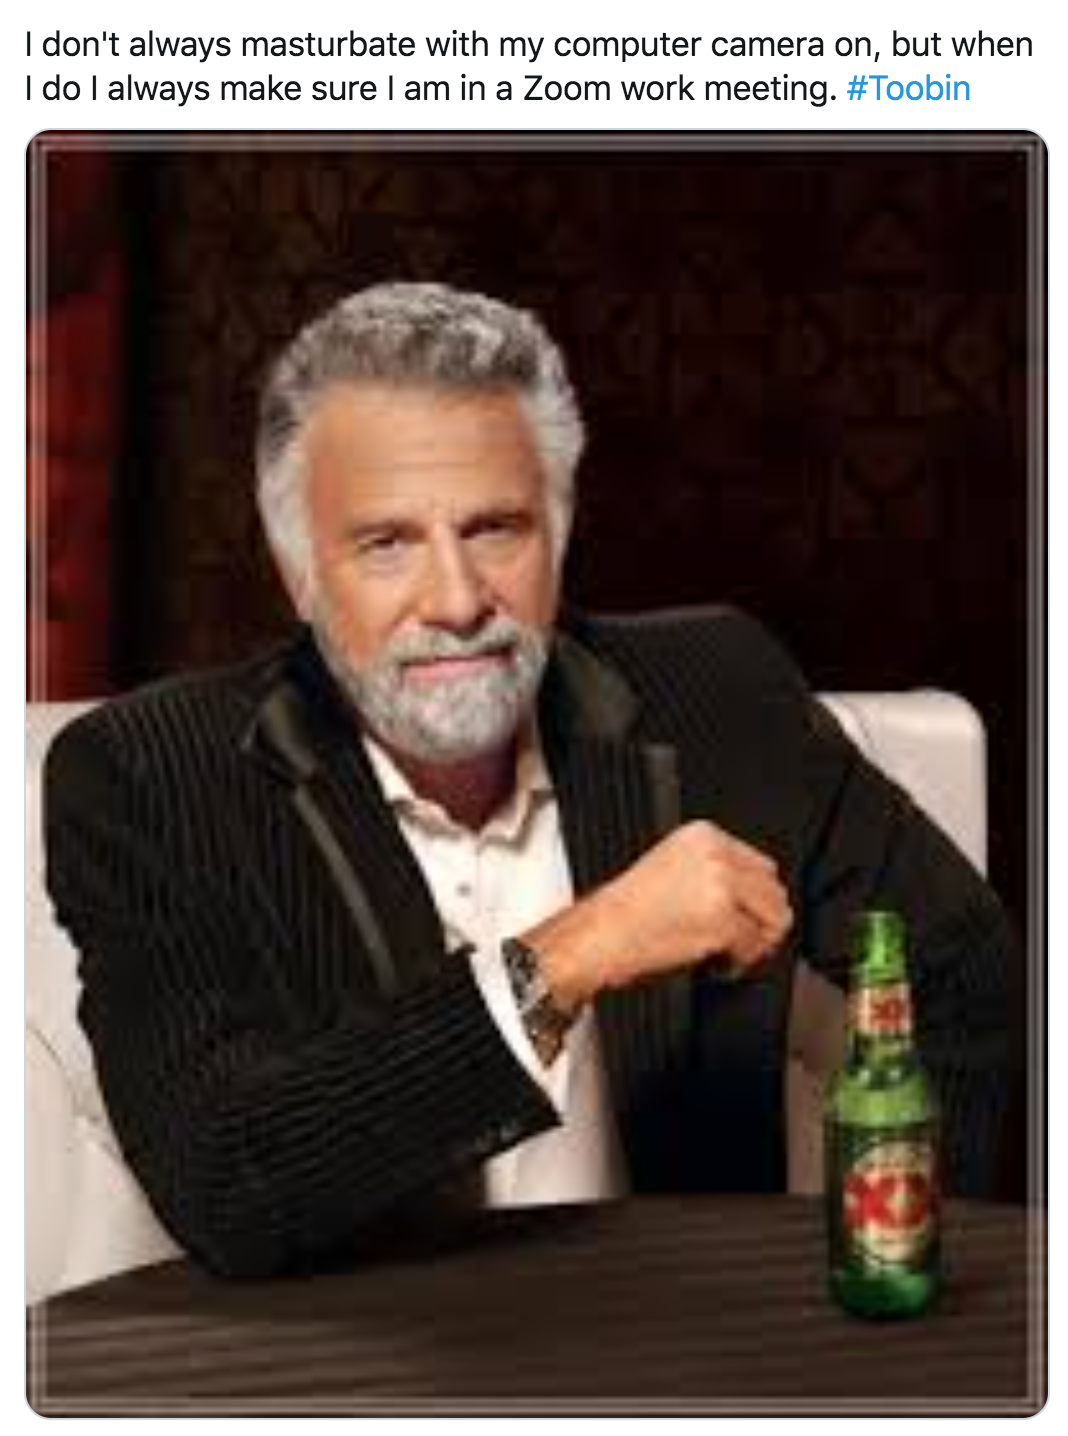 interesting man in the world - I don't always masturbate with my computer camera on, but when I do I always make sure I am in a Zoom work meeting.